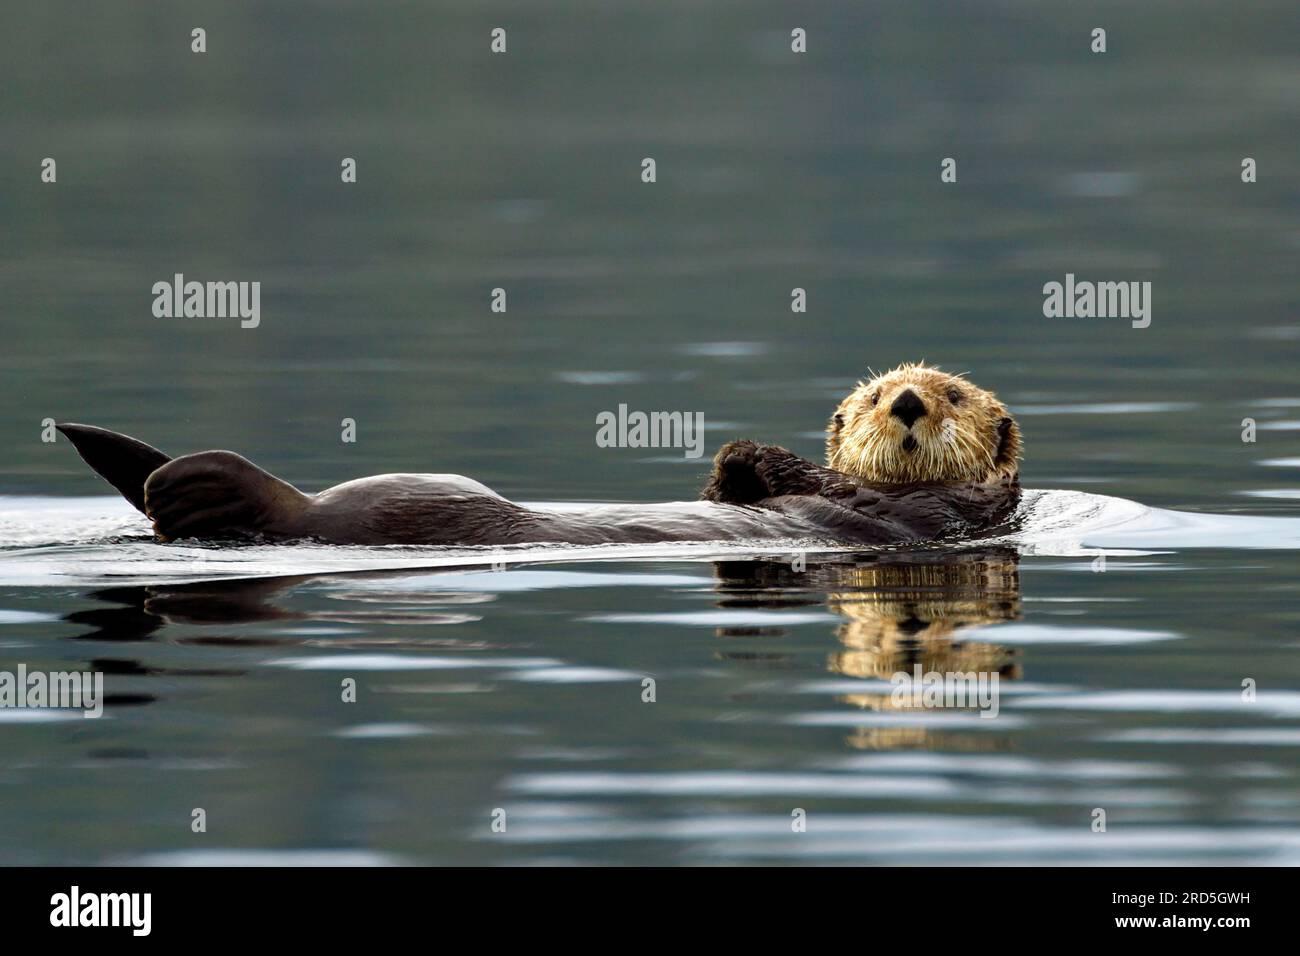 A sea otter (Enhydra lutris) floating on its back on the water surface, Prince William Sound, Alaska, USA Stock Photo